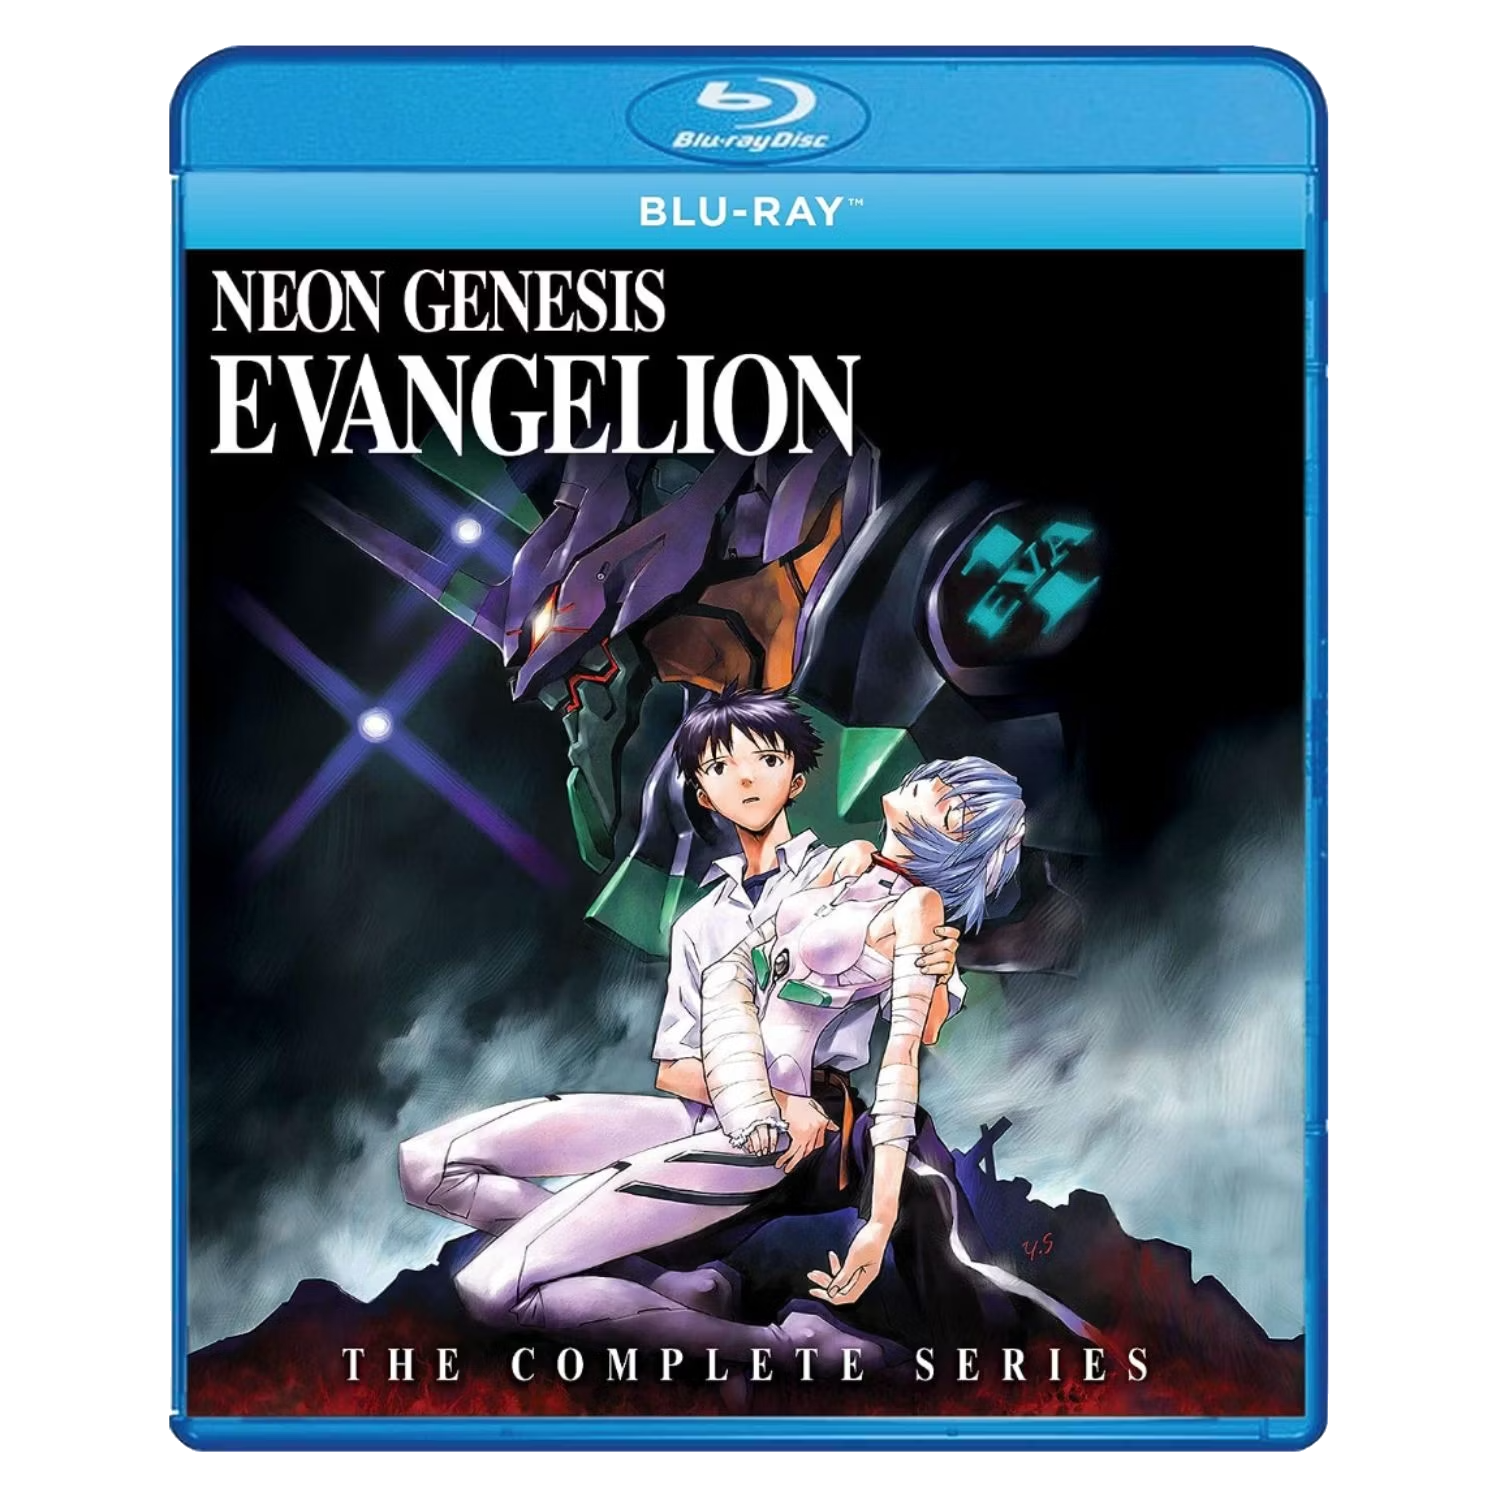 Call Of The Night Complete Collection Blu-ray Anime Review